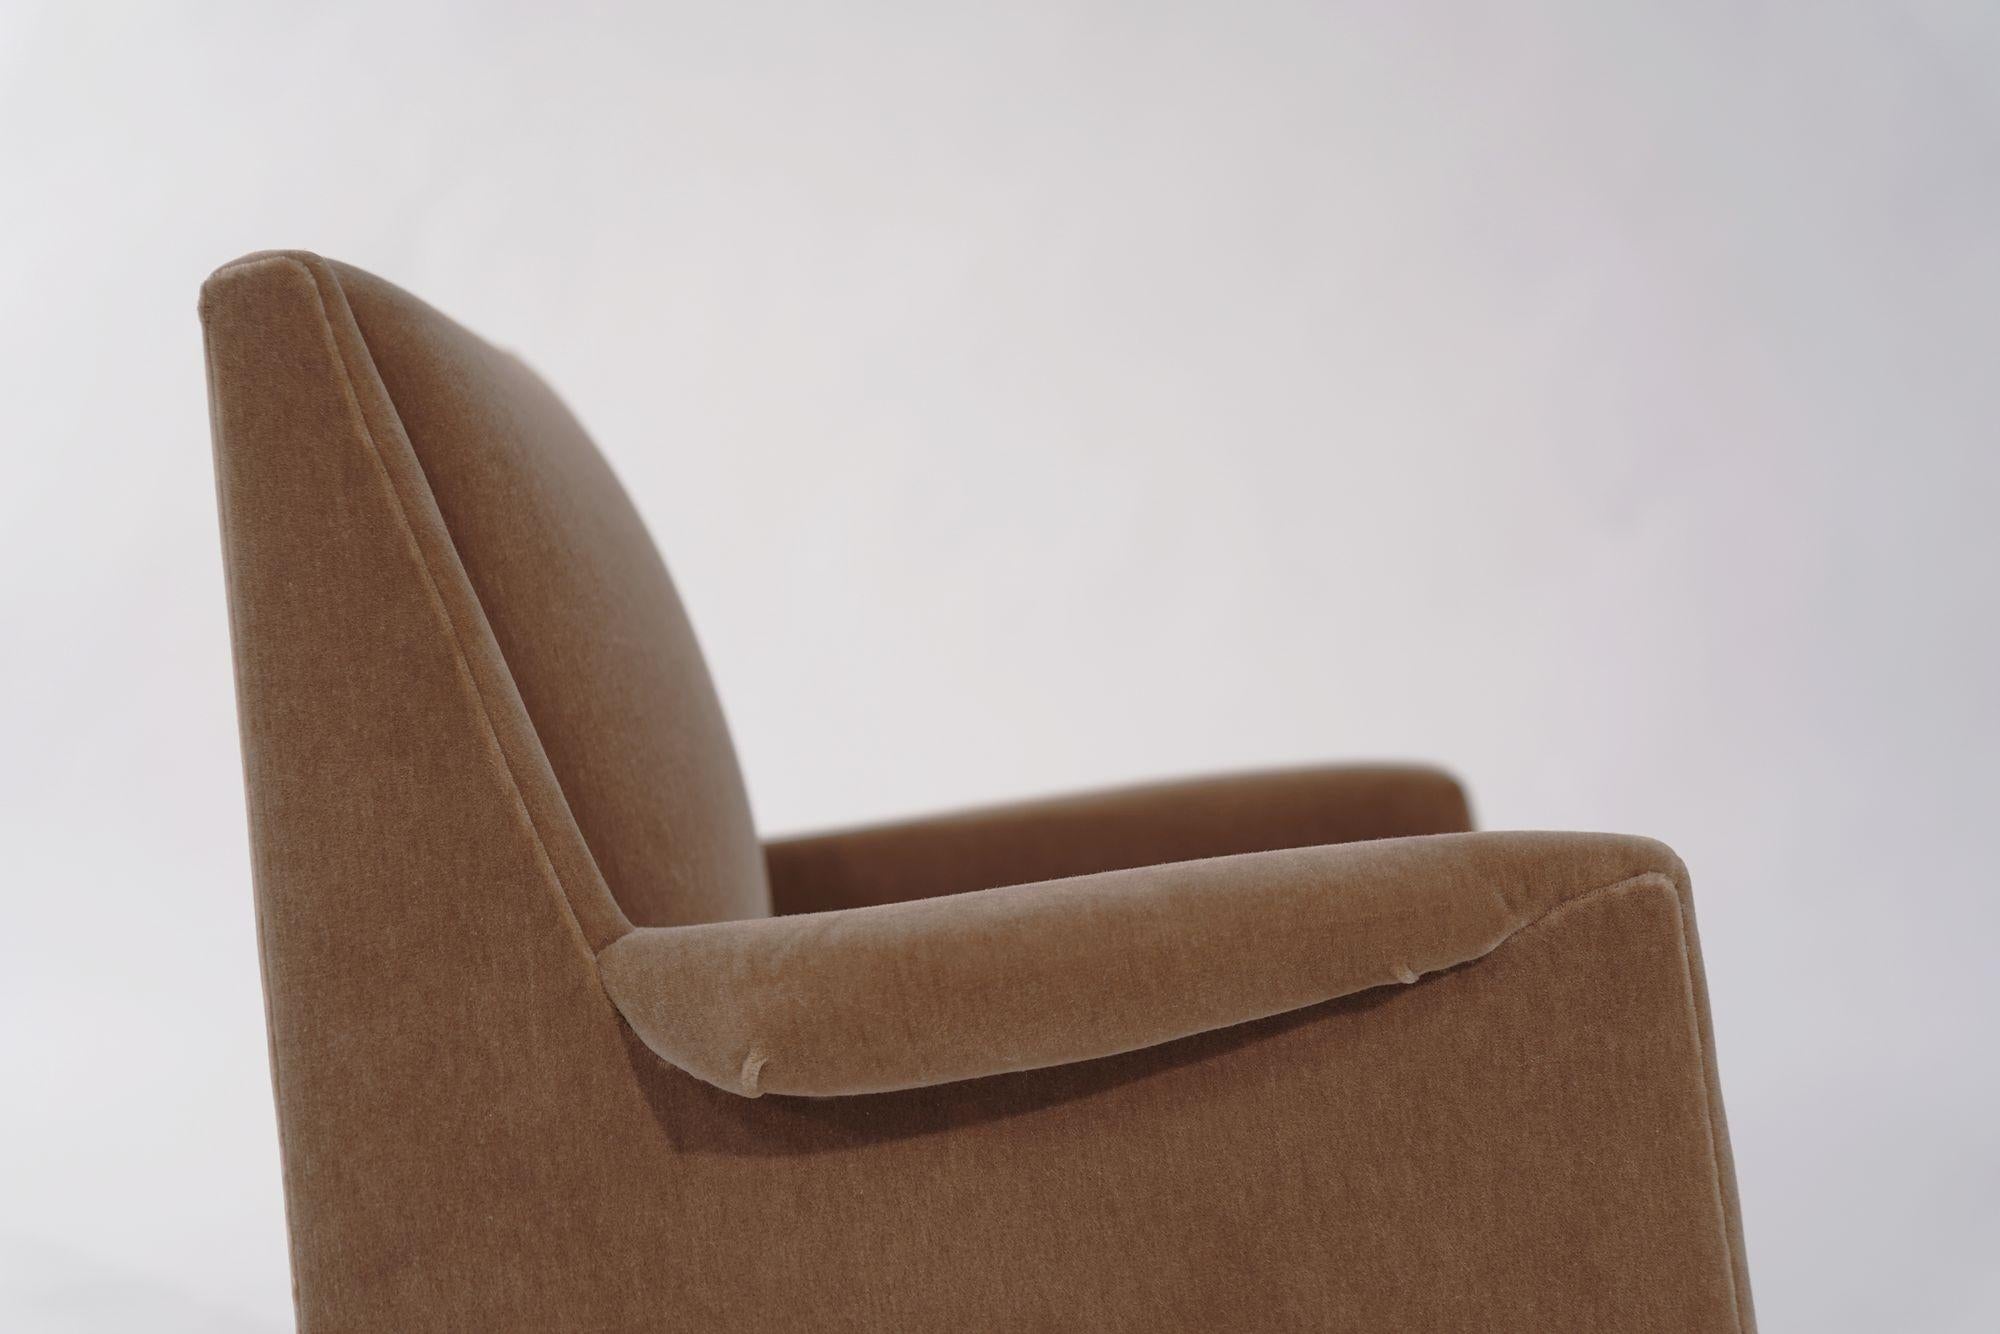 Scandinavian Modern Lounge Chair in Gold Mohair, C. 1950s For Sale 1